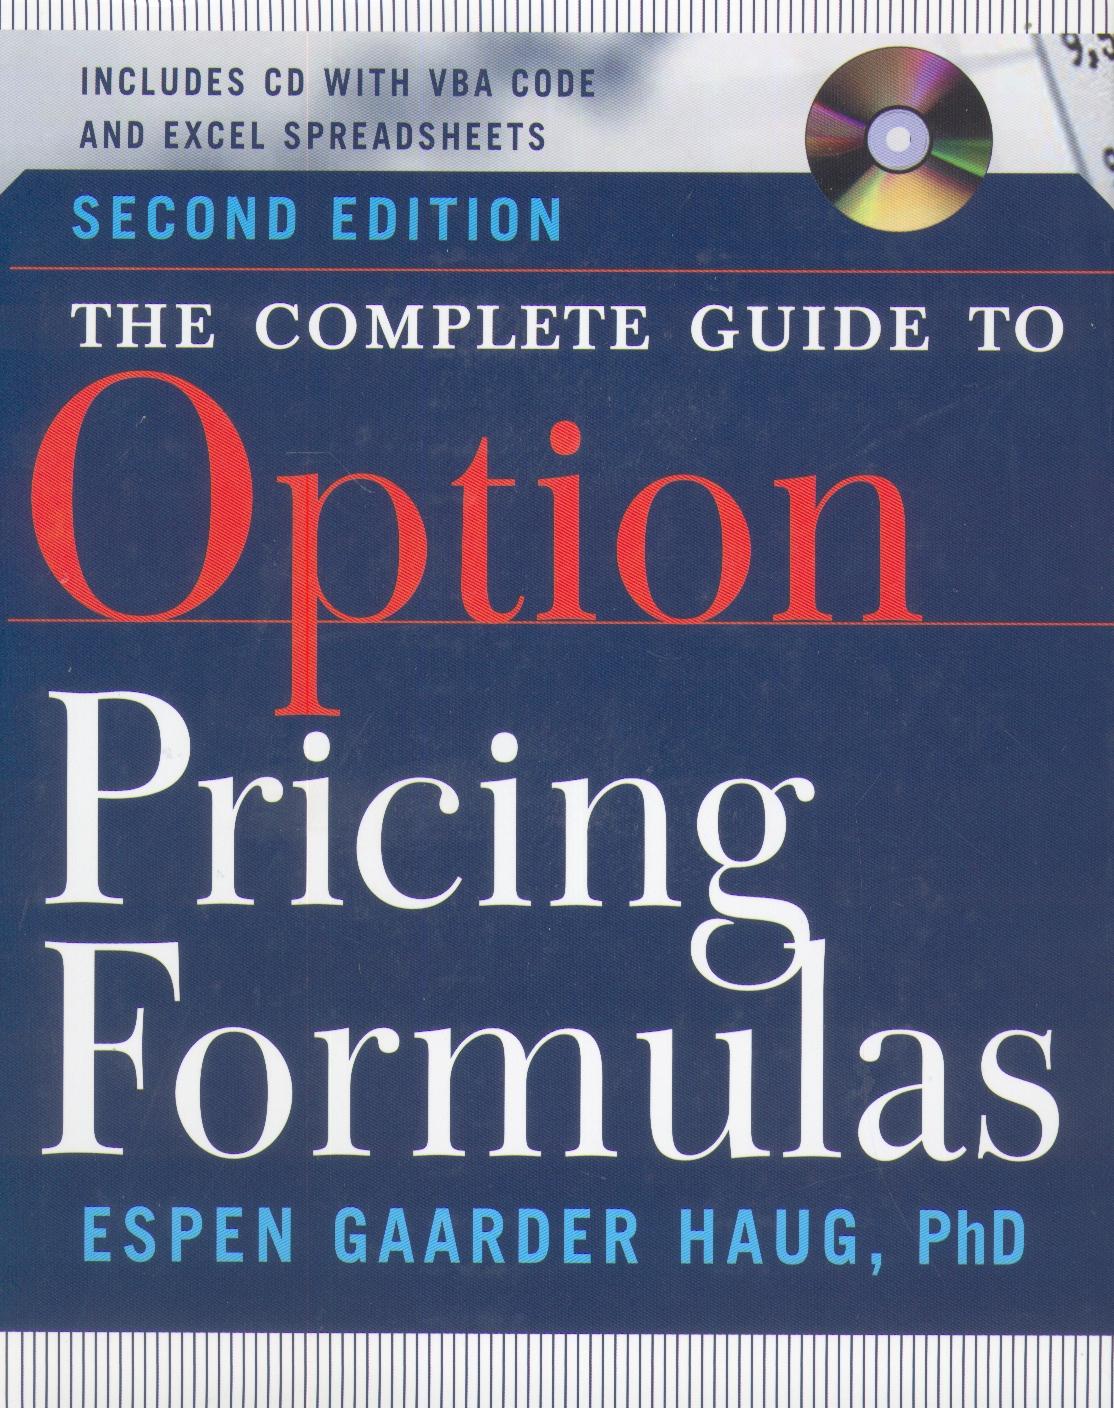 The Complete Guide To Option Pricing Formulas.